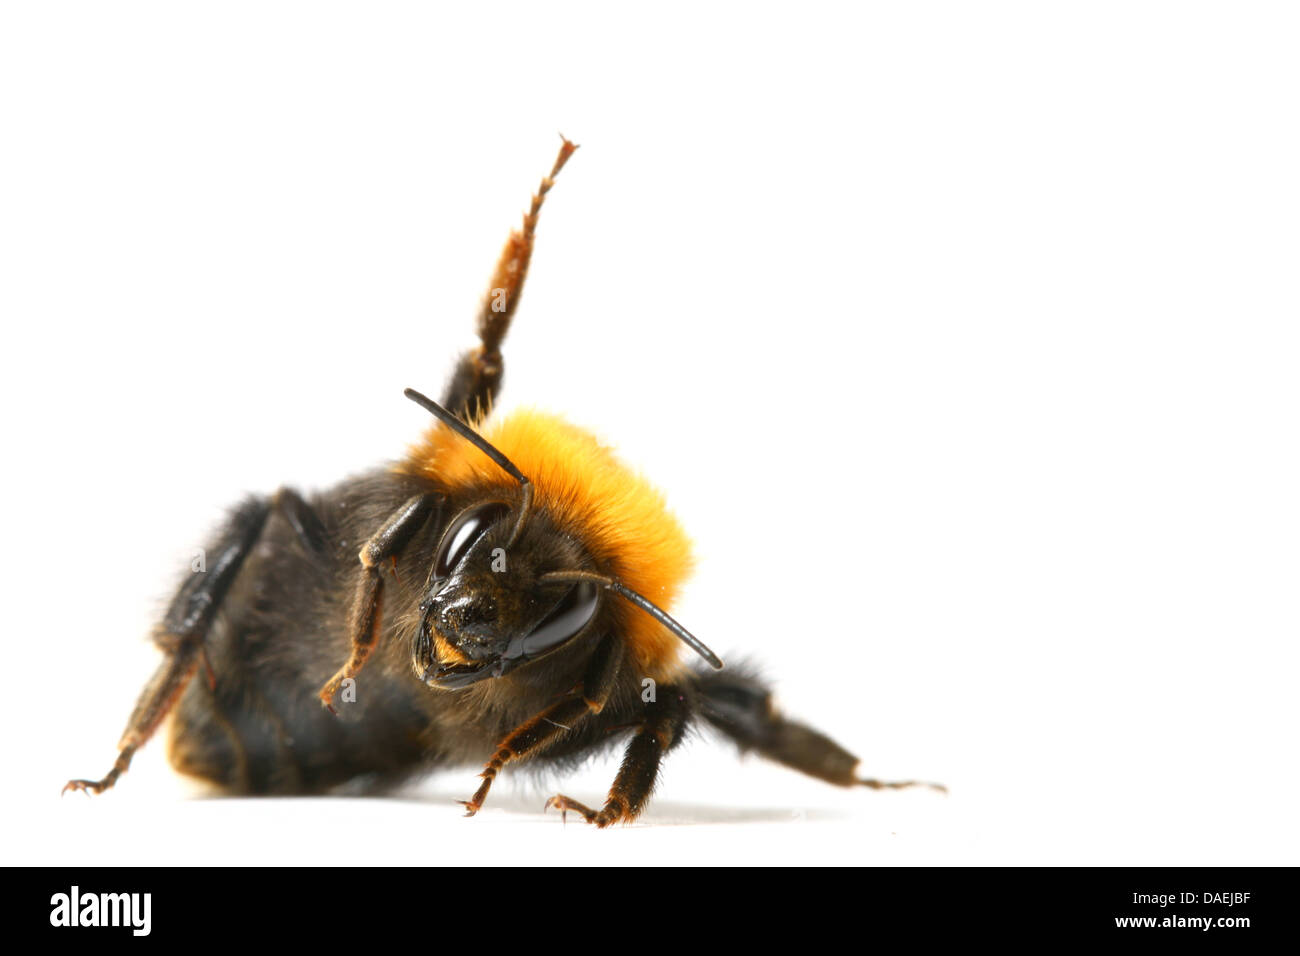 dance aerobic bumble bee isolated on white background Stock Photo